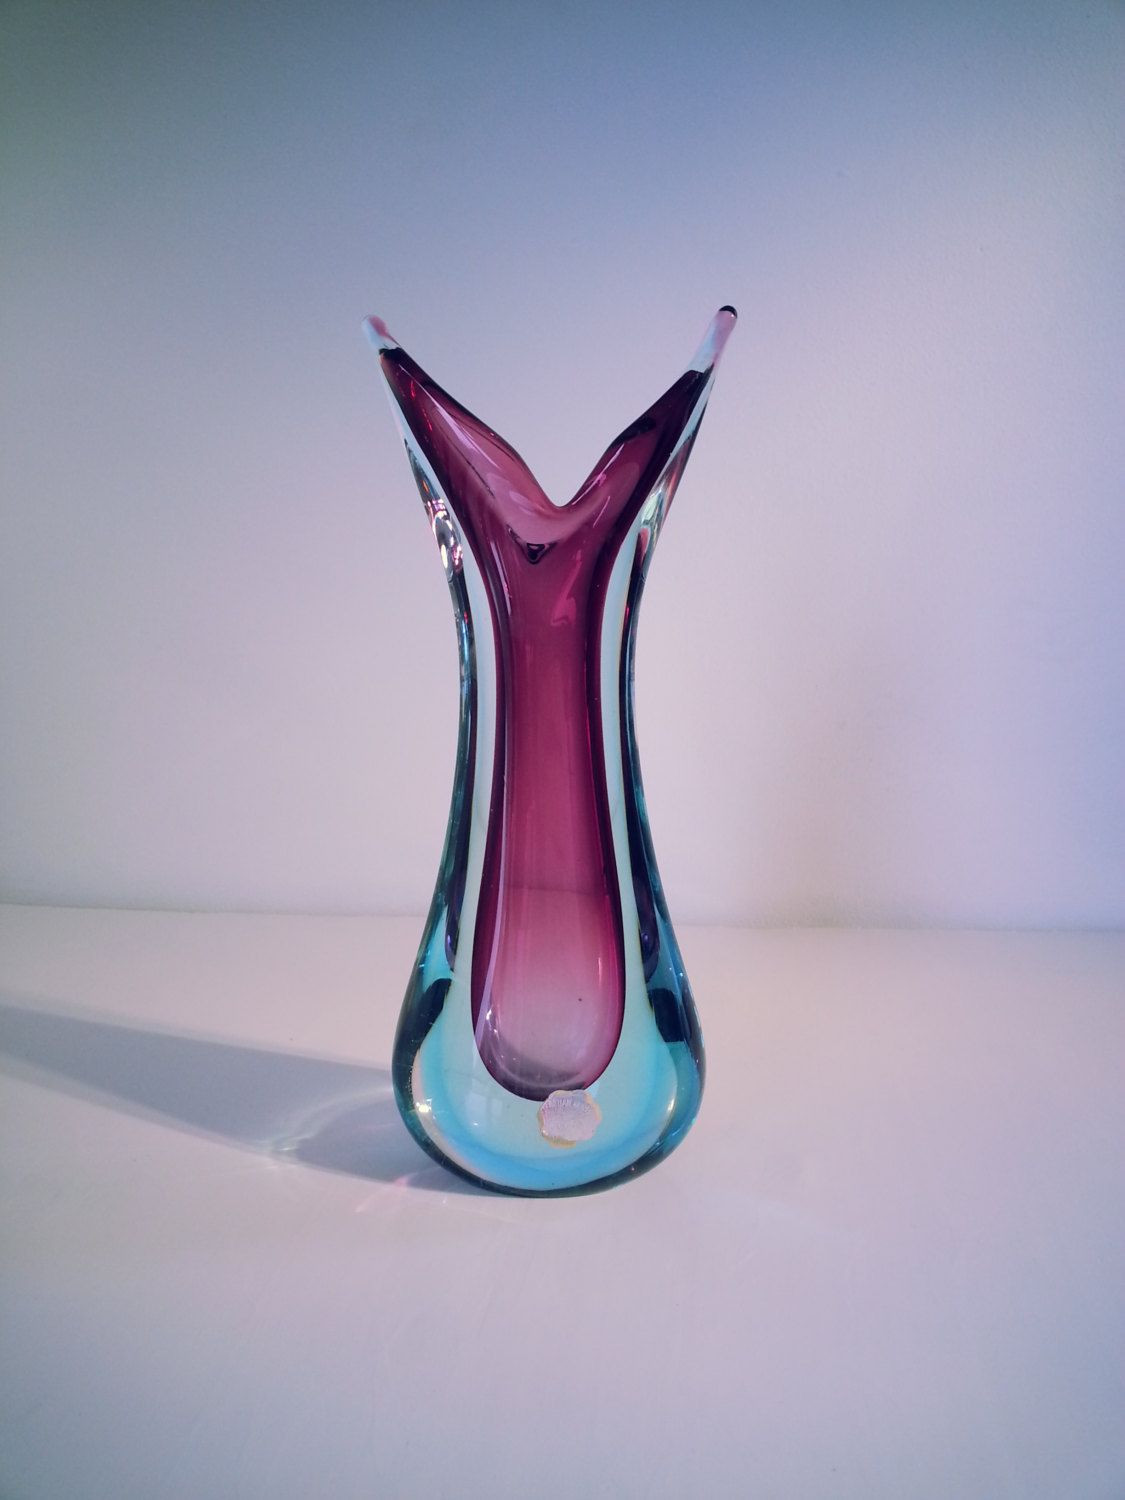 16 Stylish Red and Gold Glass Vase 2024 free download red and gold glass vase of murano sommerso genuine venetian glass 1950s 1960s purple blue inside murano sommerso genuine venetian glass 1950s 1960s purple blue glass vase pulled design vase 